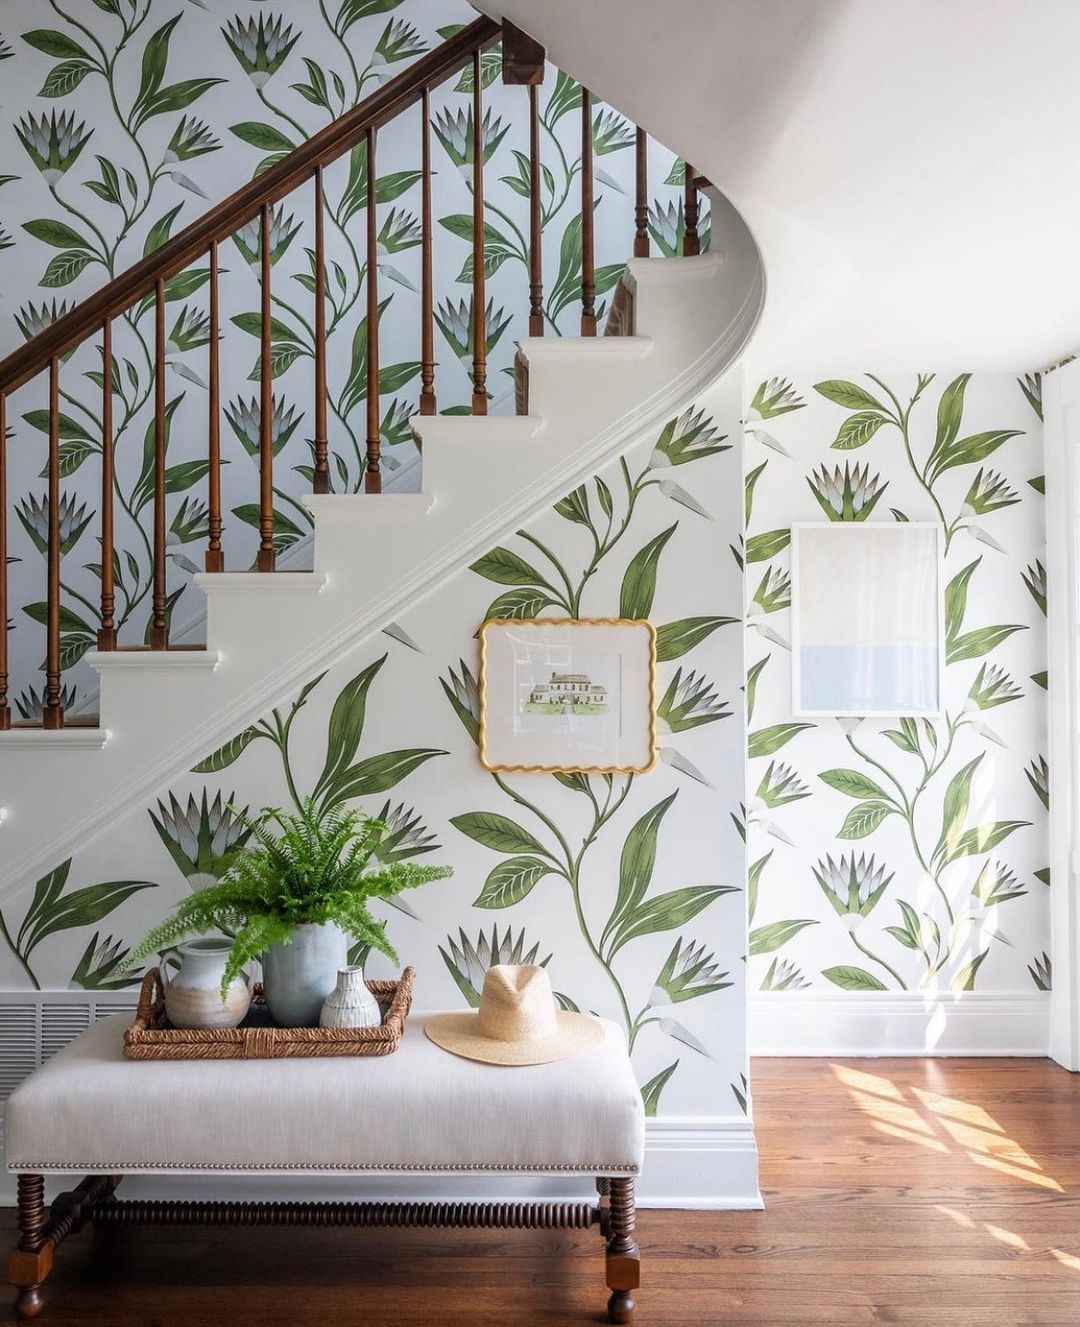 Thibaut On Instagram This Entryway And Staircase Is Truly A